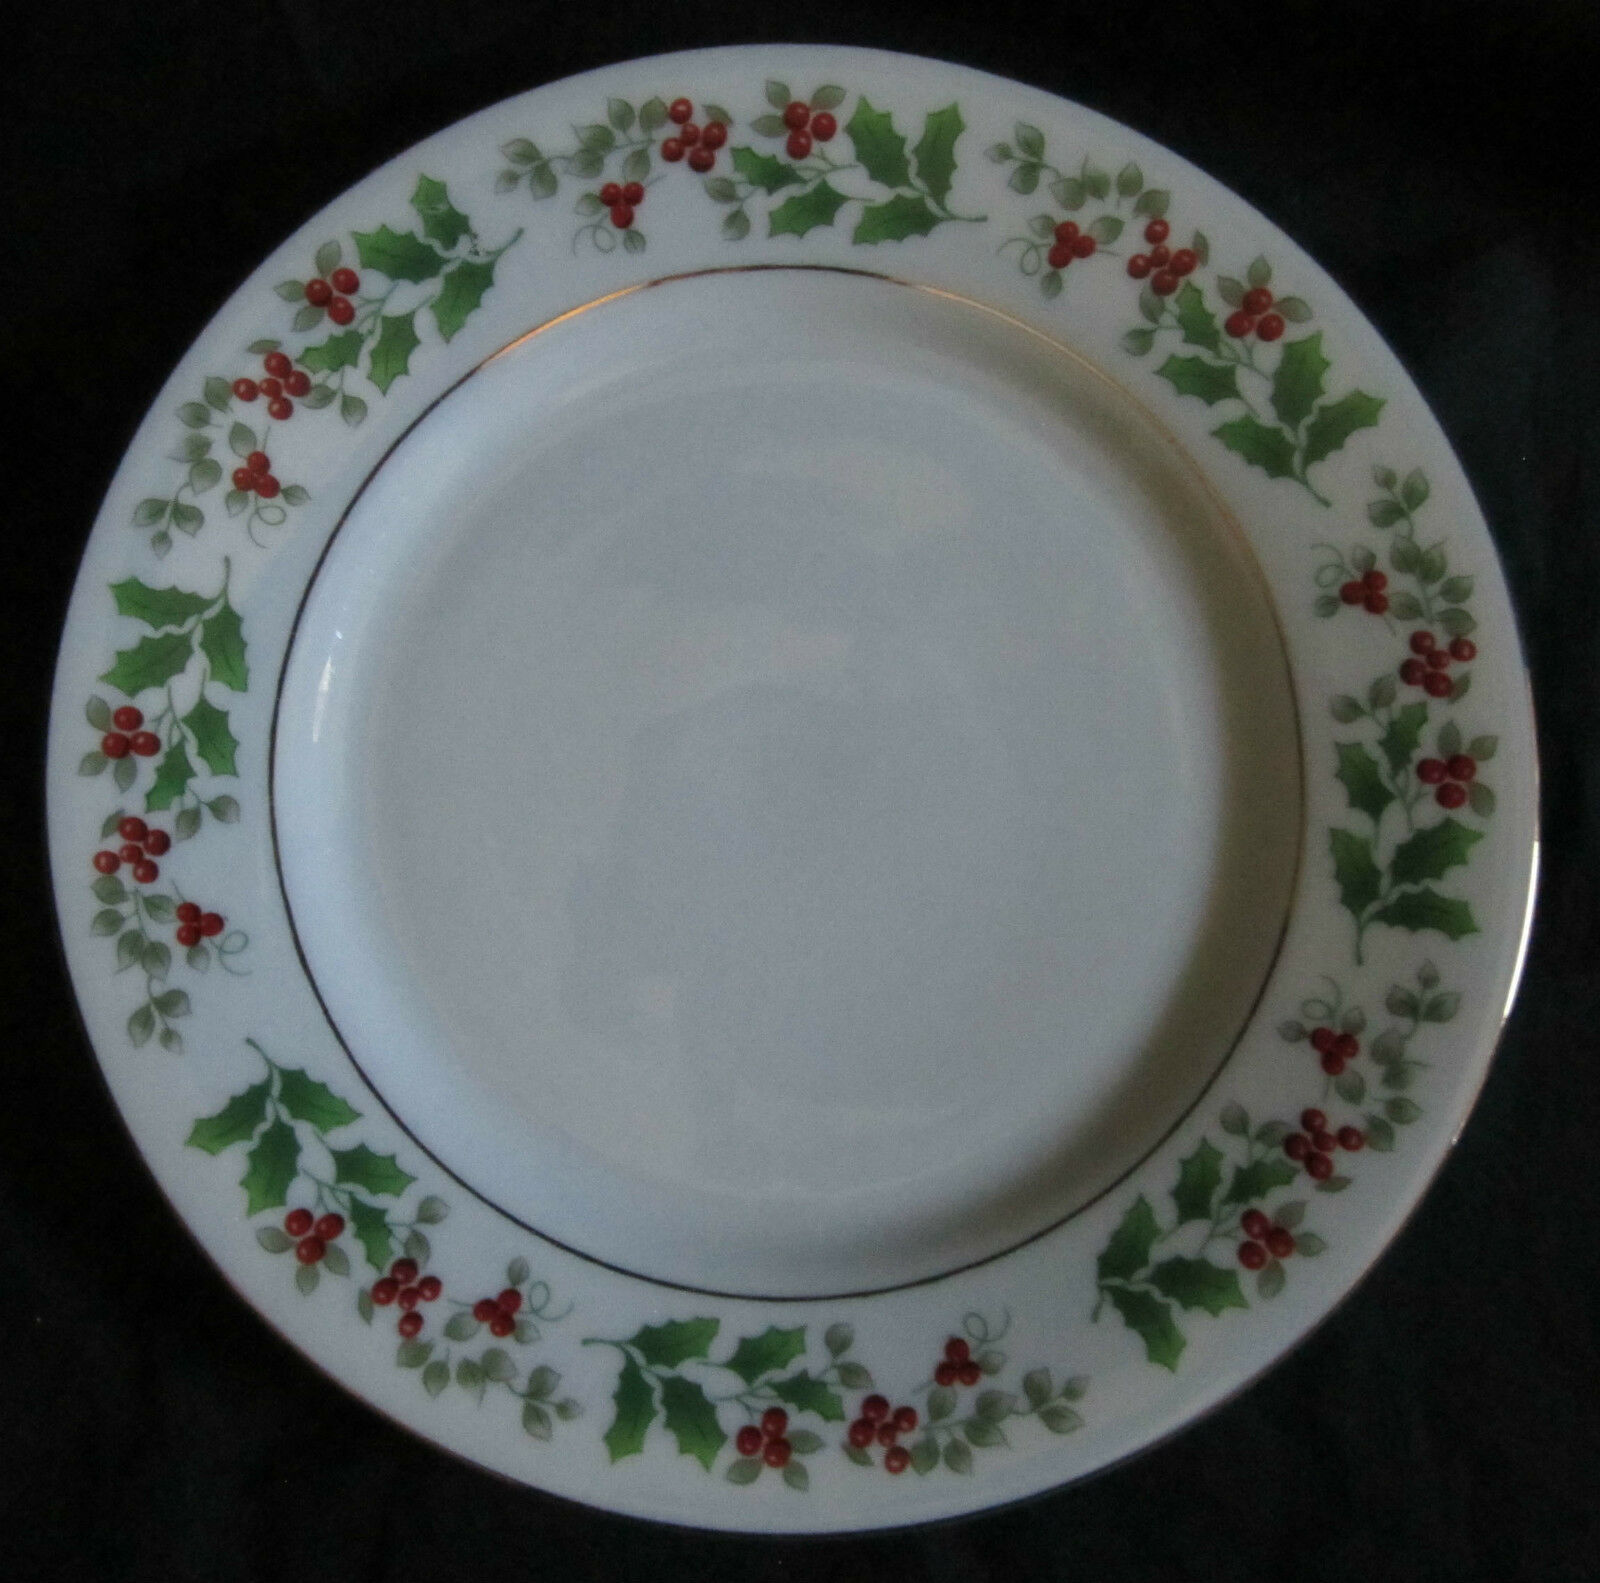 Gibson Designs Holiday Classics Holly Berry China Dark Green Leaves Red Berries - $10.99